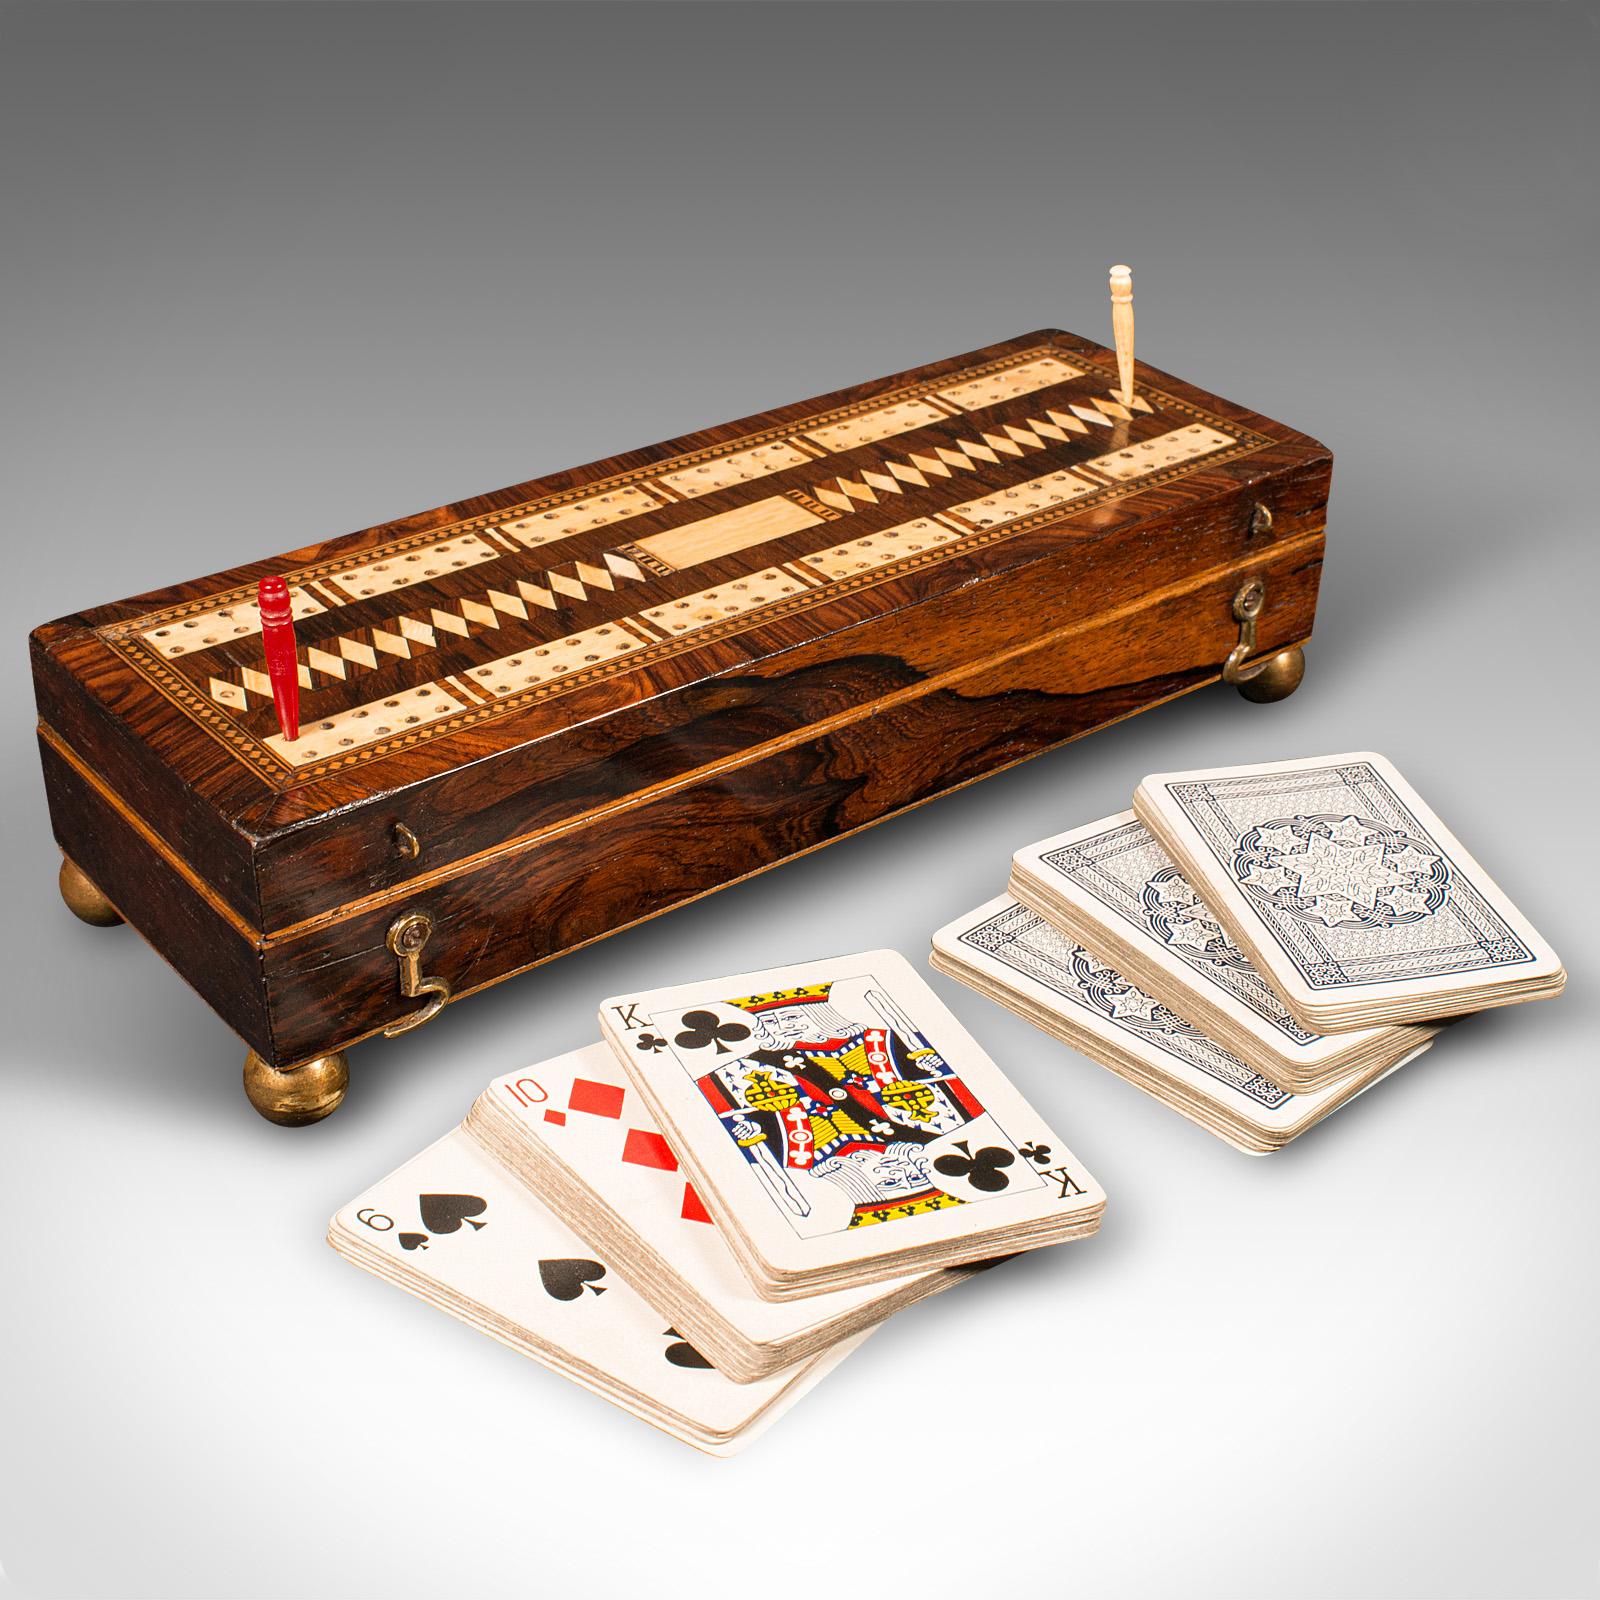 This is an antique gentleman's cribbage case. An English, rosewood and brass card game box, dating to the Victorian period, circa 1880.

Beautifully presented case for spontaneous hands of cribbage
Displays a desirable aged patina and in good